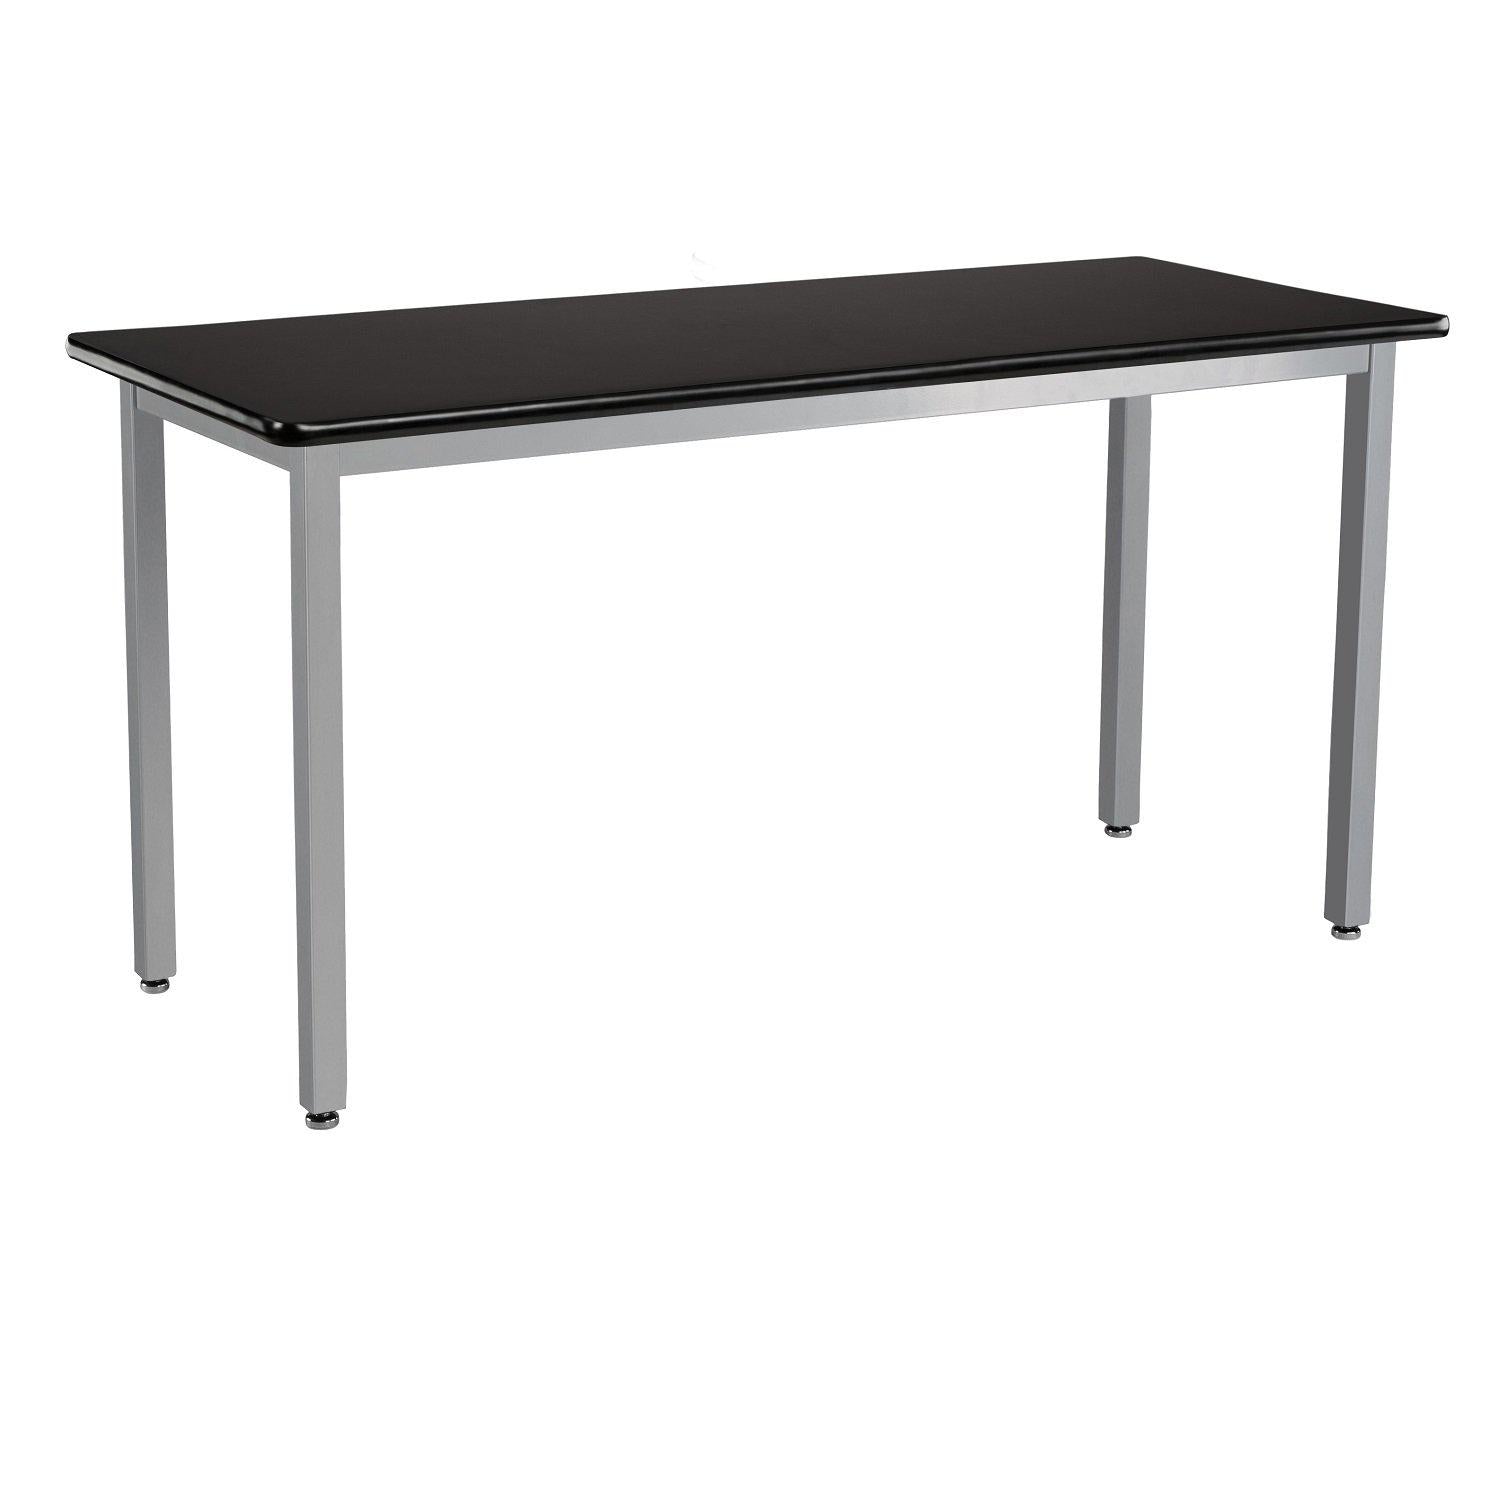 Heavy-Duty Fixed Height Utility Table, Soft Grey Frame, 30" x 42", High-Pressure Laminate Top with T-Mold Edge